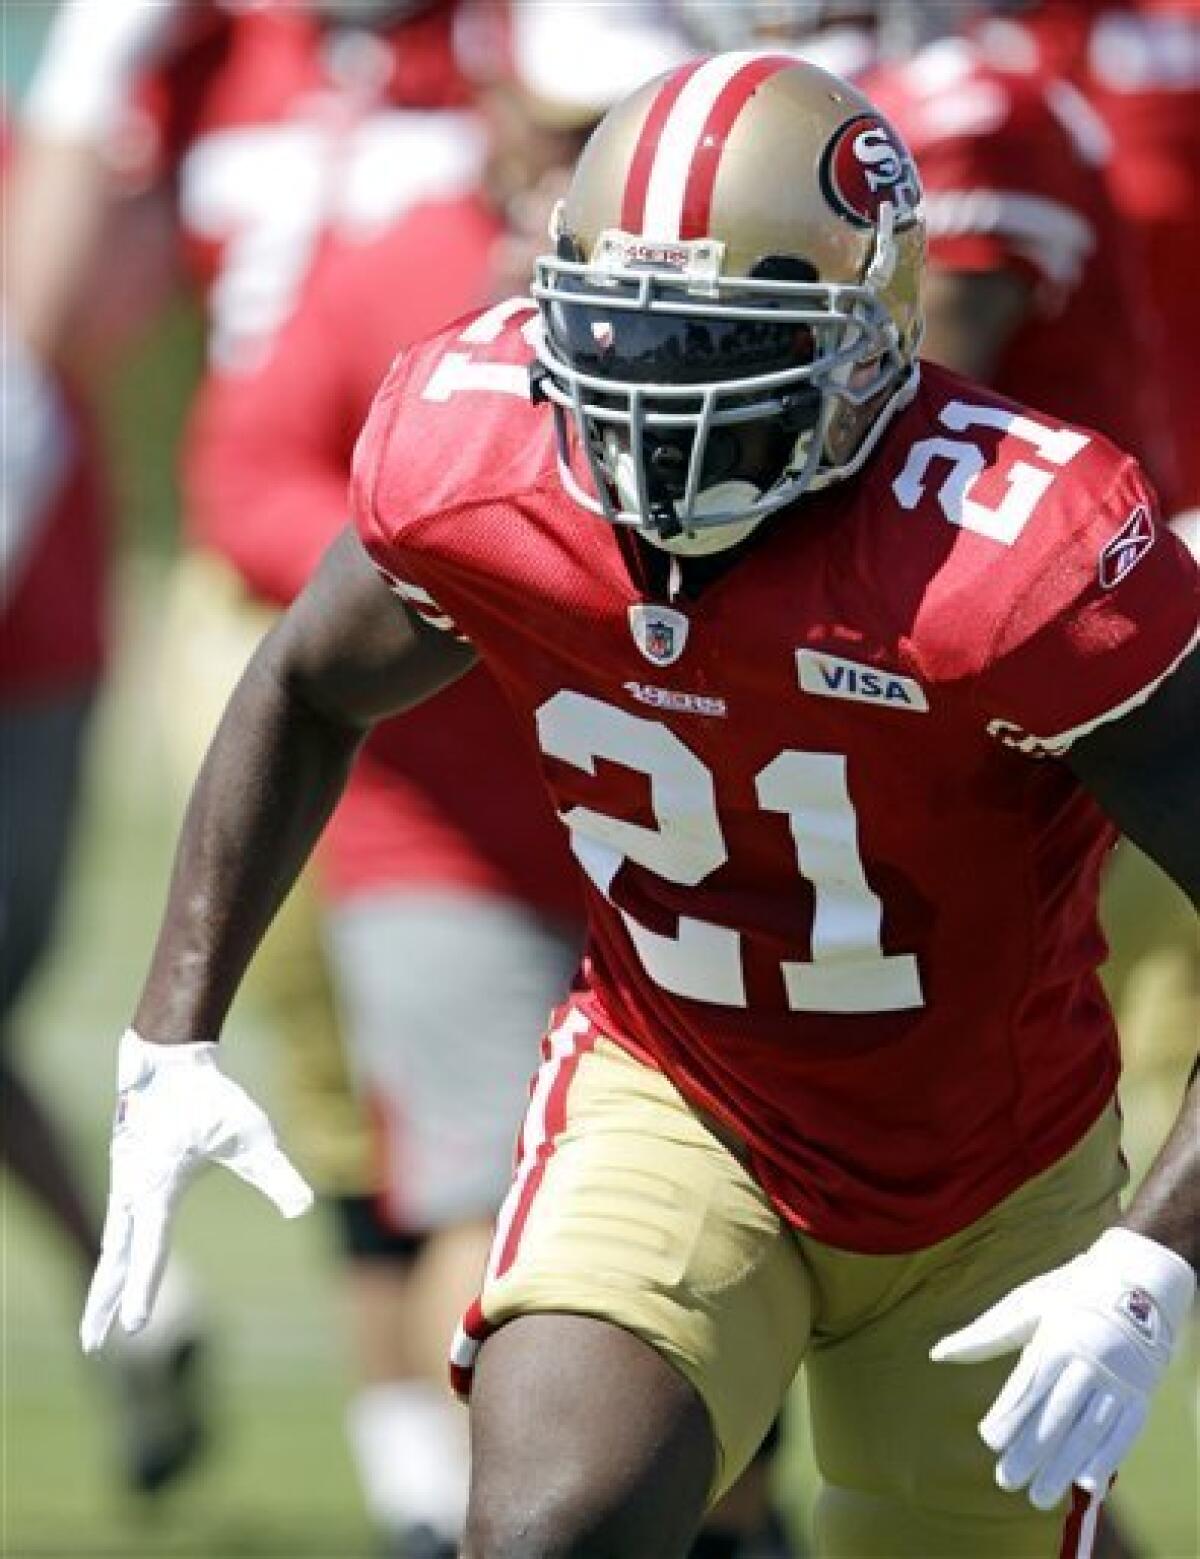 Gore practices with 49ers for first time - The San Diego Union-Tribune